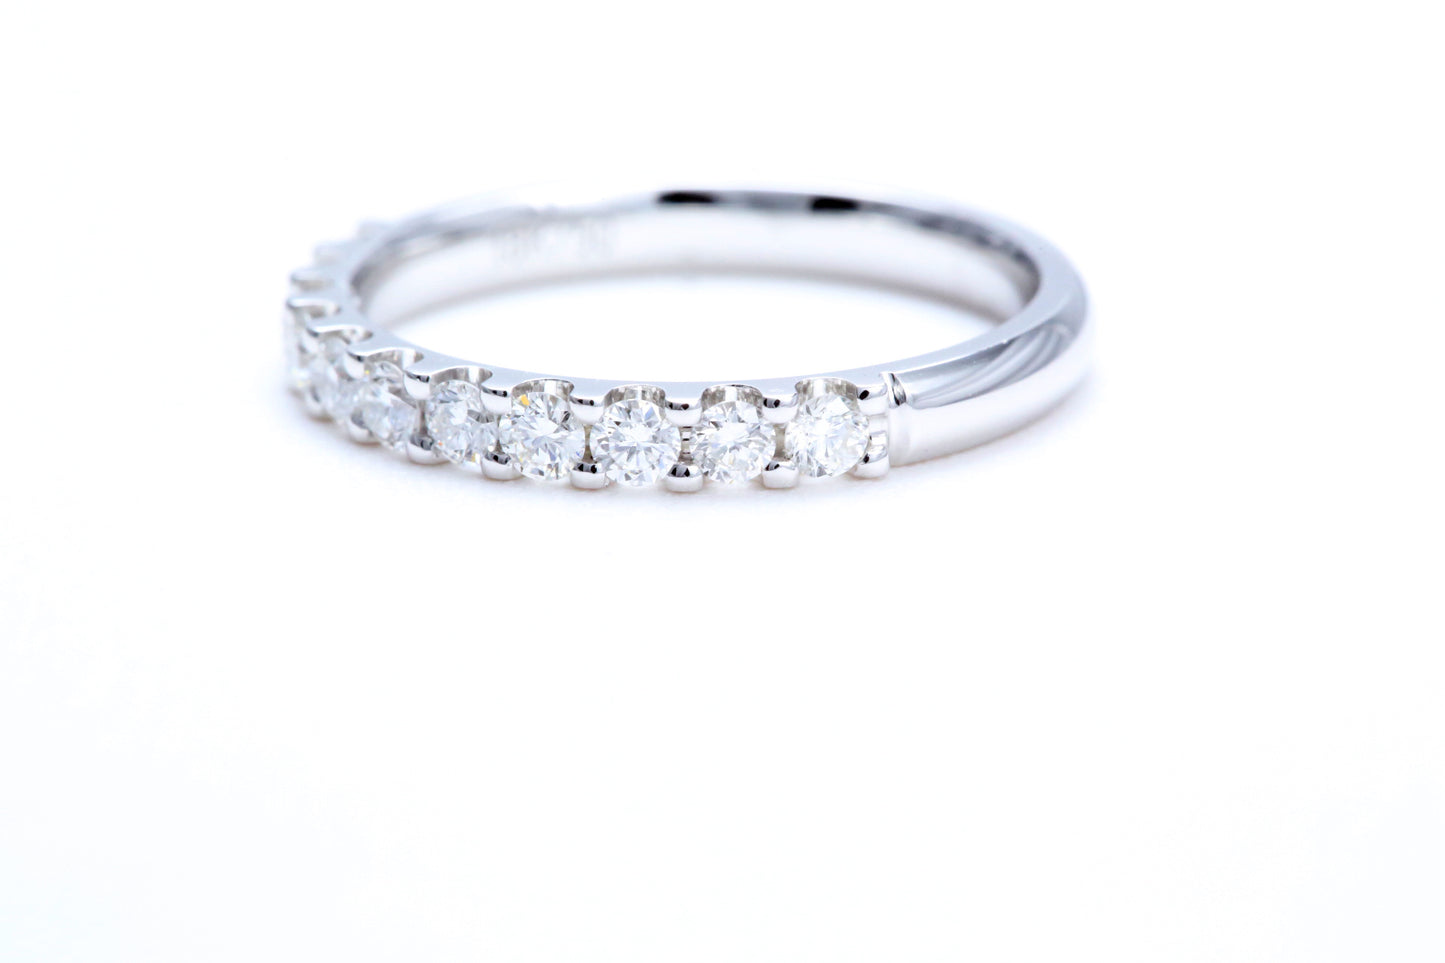 Minimalist Pavé Diamond Ring 1/2 of a carat total weight in 14K white gold